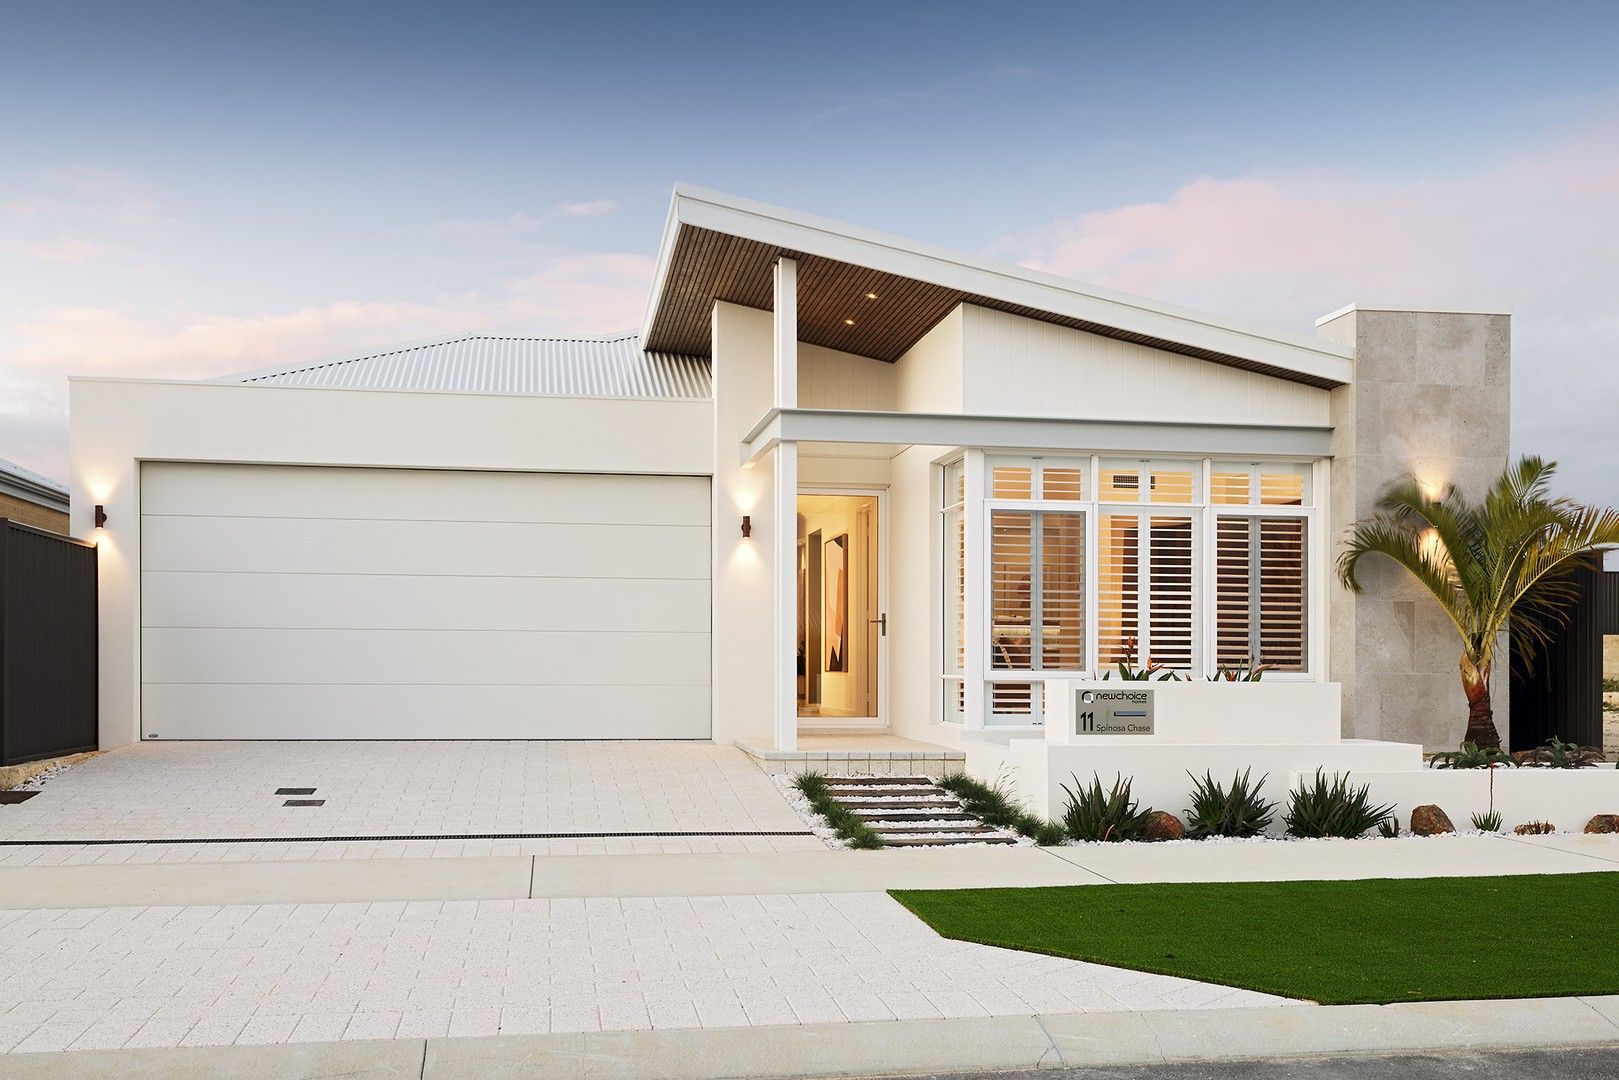 4 bedrooms New House & Land in  BALDIVIS WA, 6171